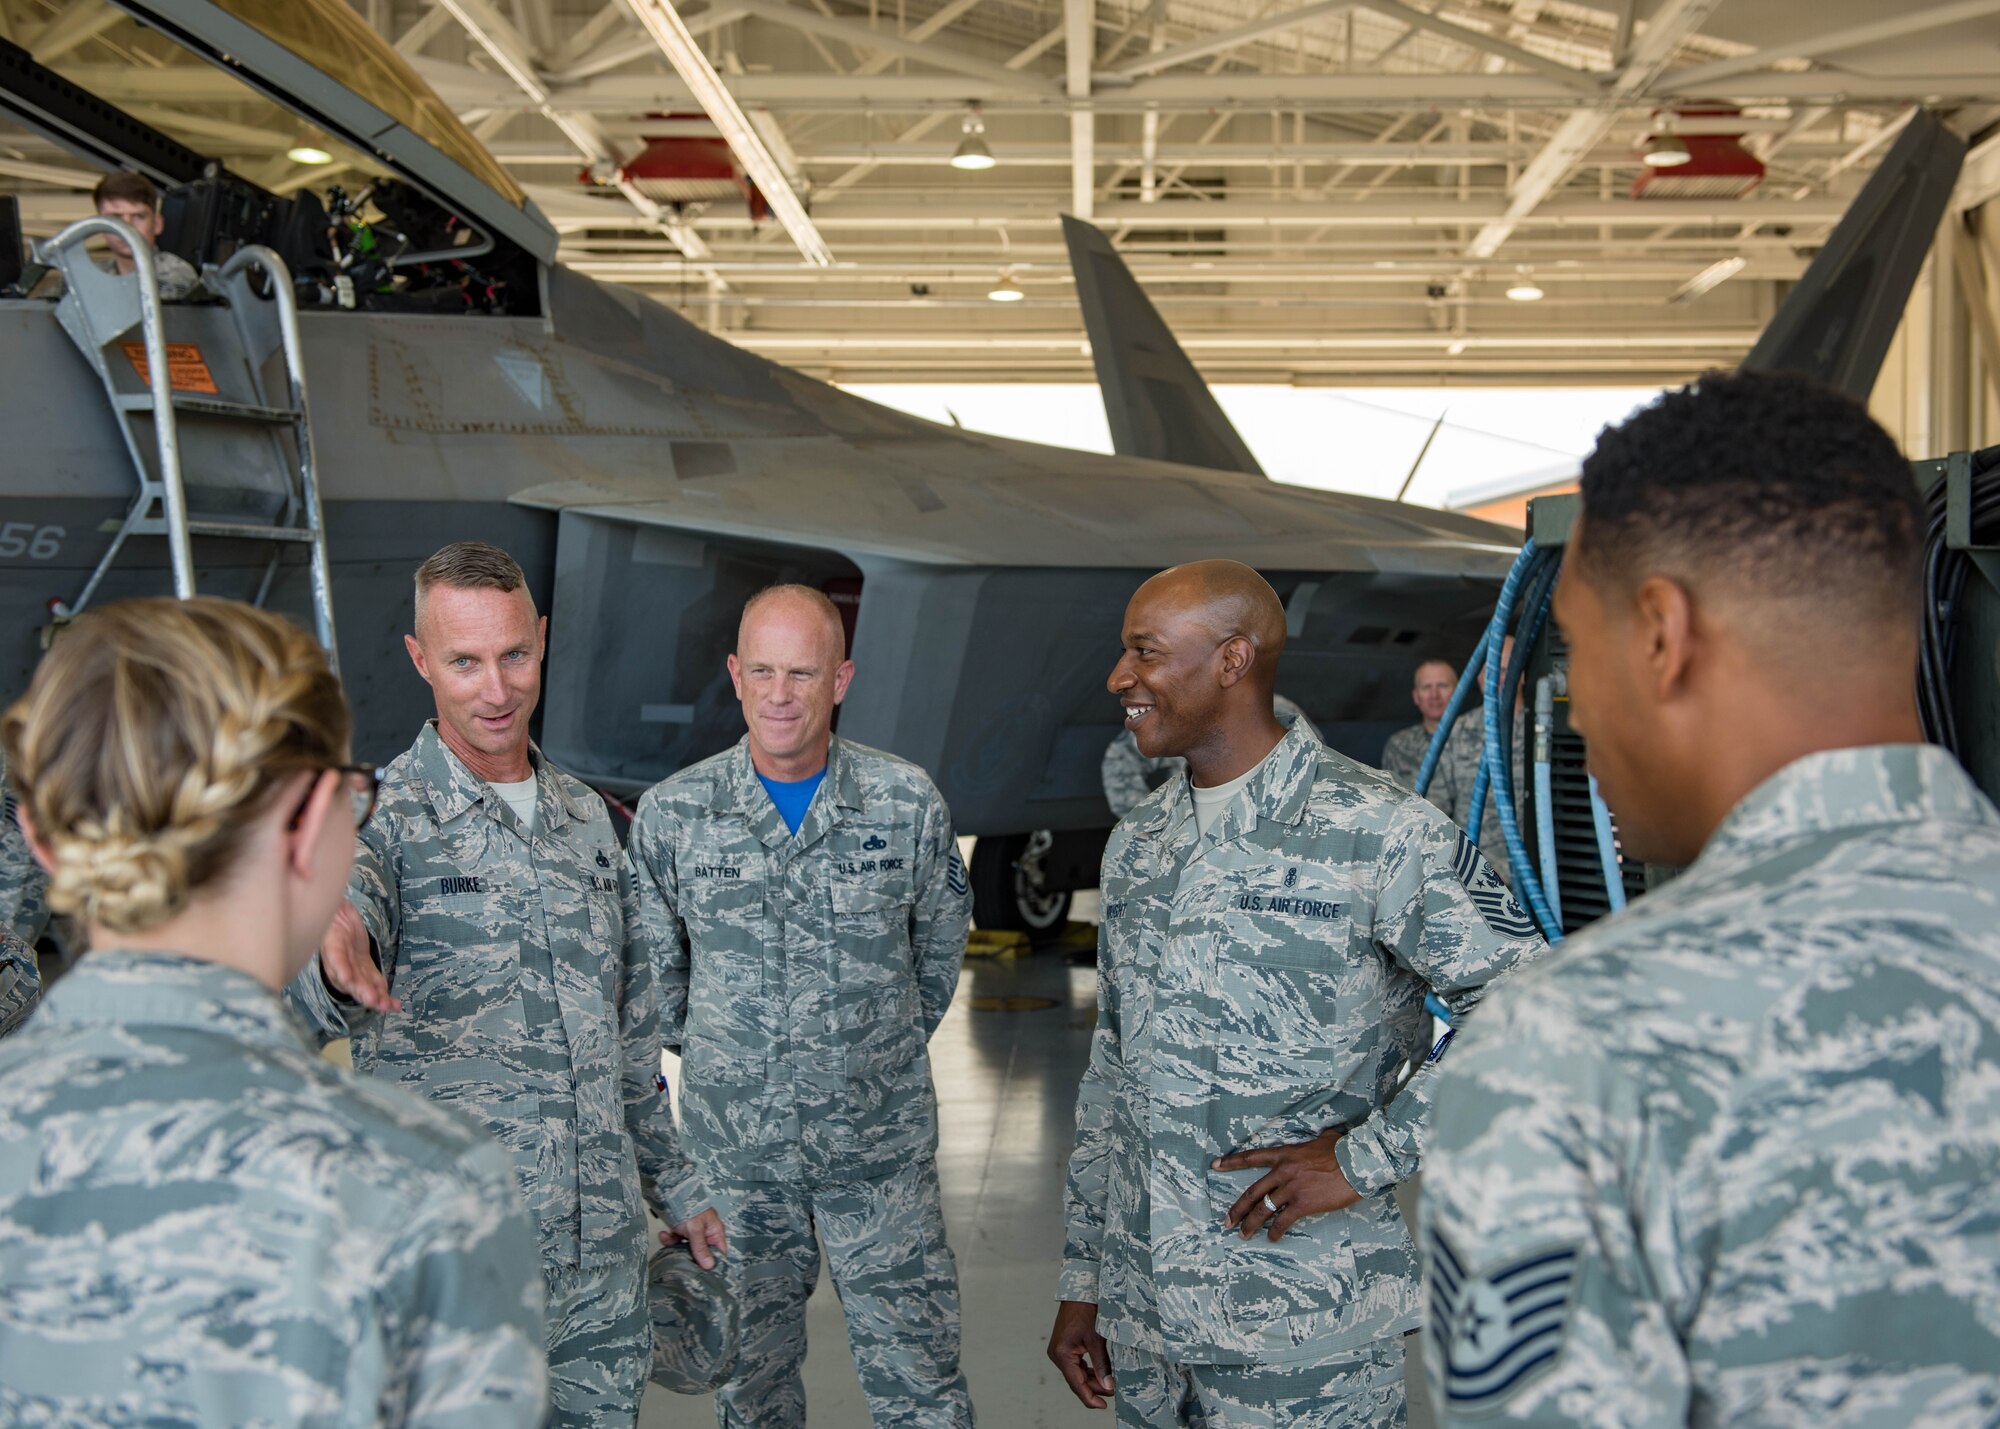 Air Combat Command and 1st Fighter Wing senior leaders introduce outstanding Airmen from their unit to Chief Master Sgt. of the Air Force Kaleth O. Wright during his visit to Joint Base Langley-Eustis, Virginia, June 29, 2018. Wright toured JBLE for two days seeing the day-to-day operations of the different wings and units here. (U.S. Air Force photo by Airman 1st Class Anthony Nin-Leclerec)